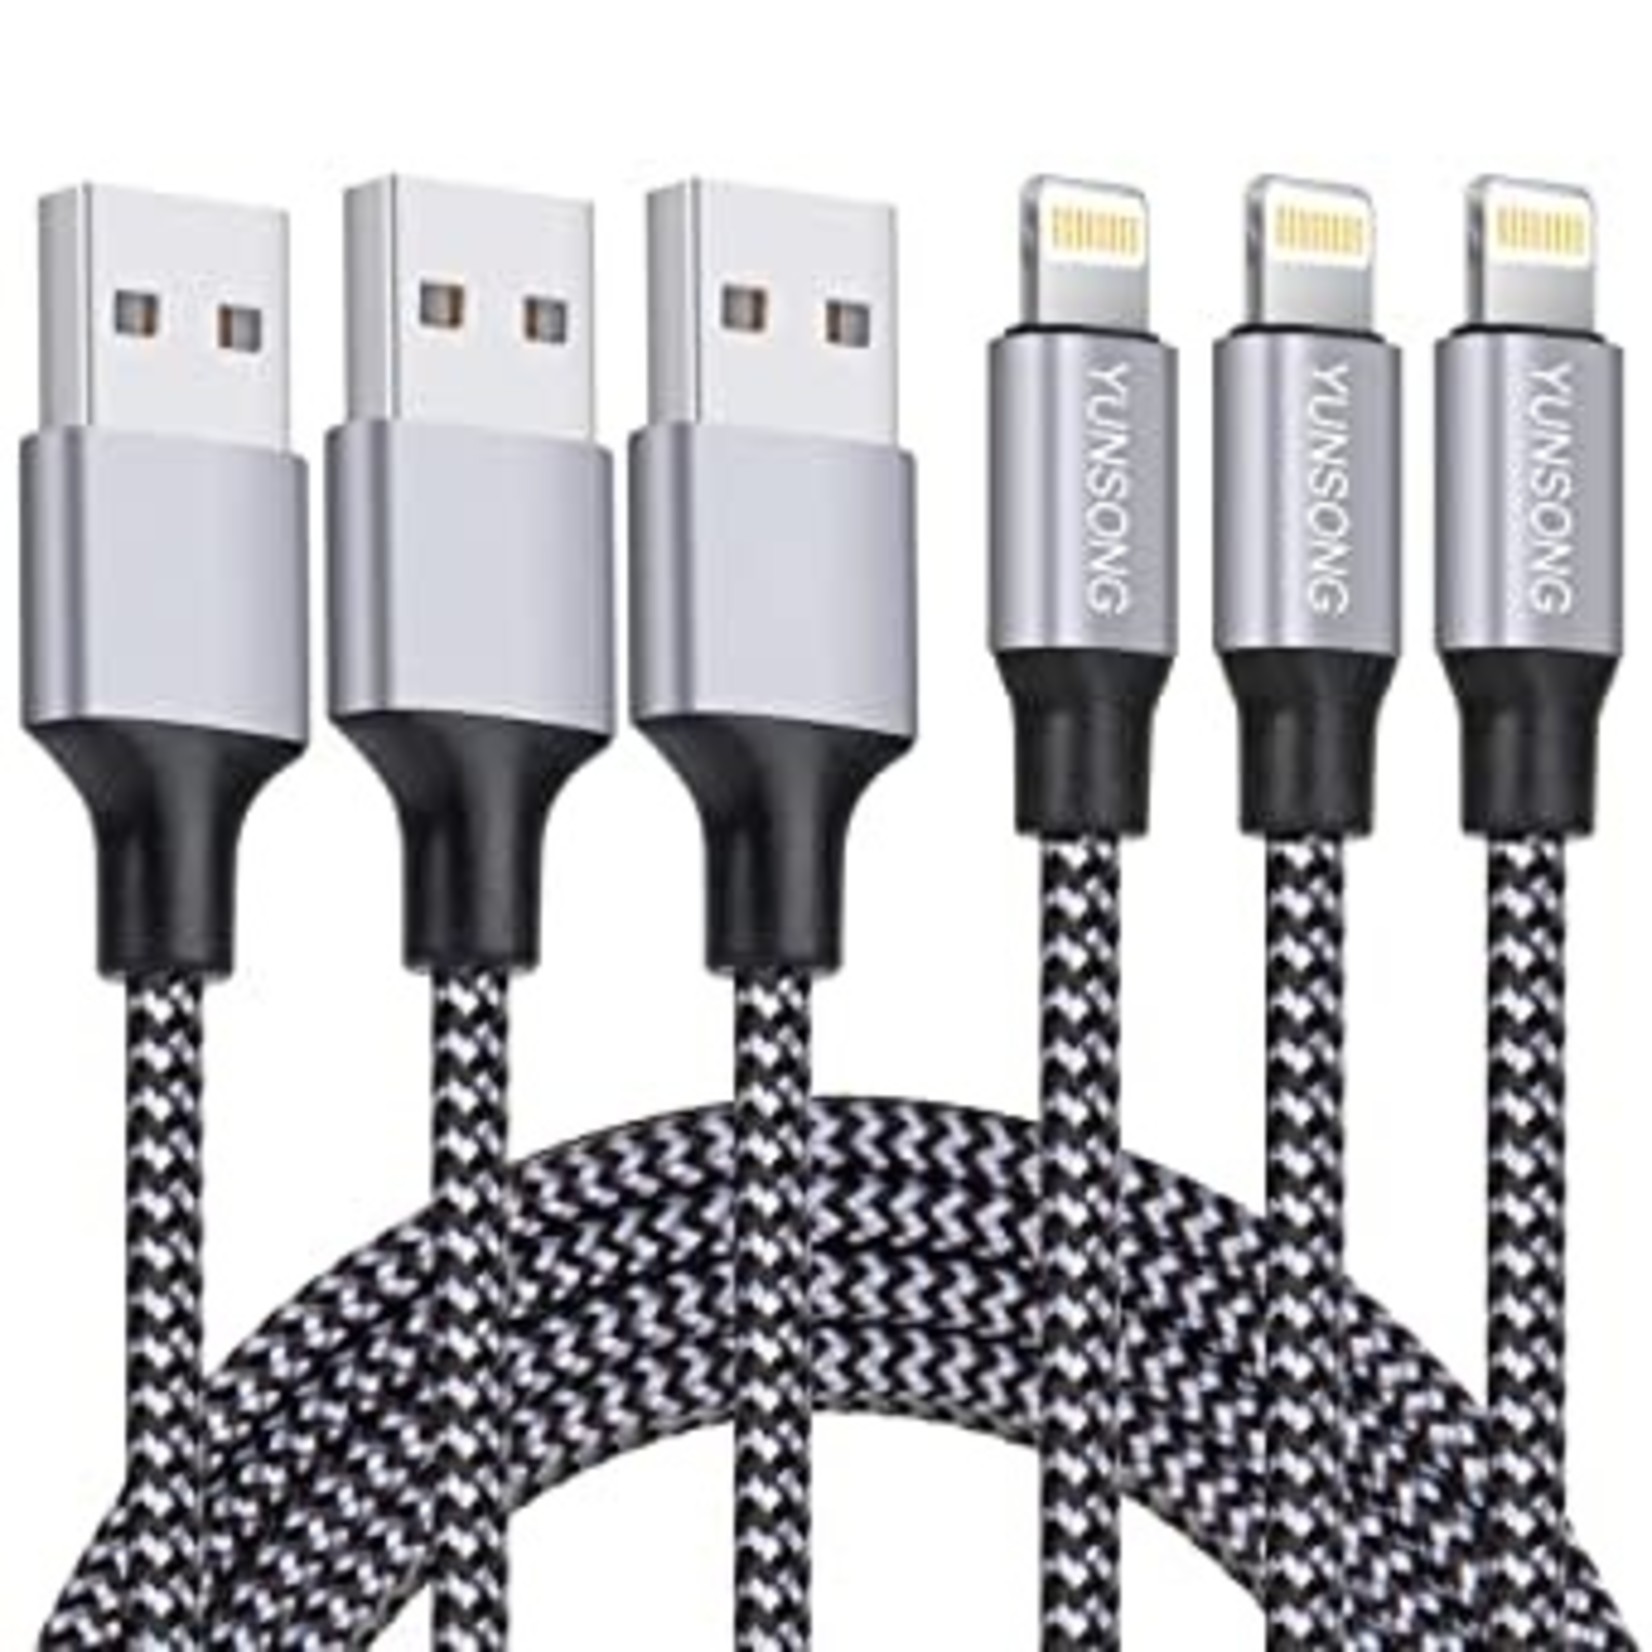 Universal Wholesale iPhone Charger cords USB to iPhone